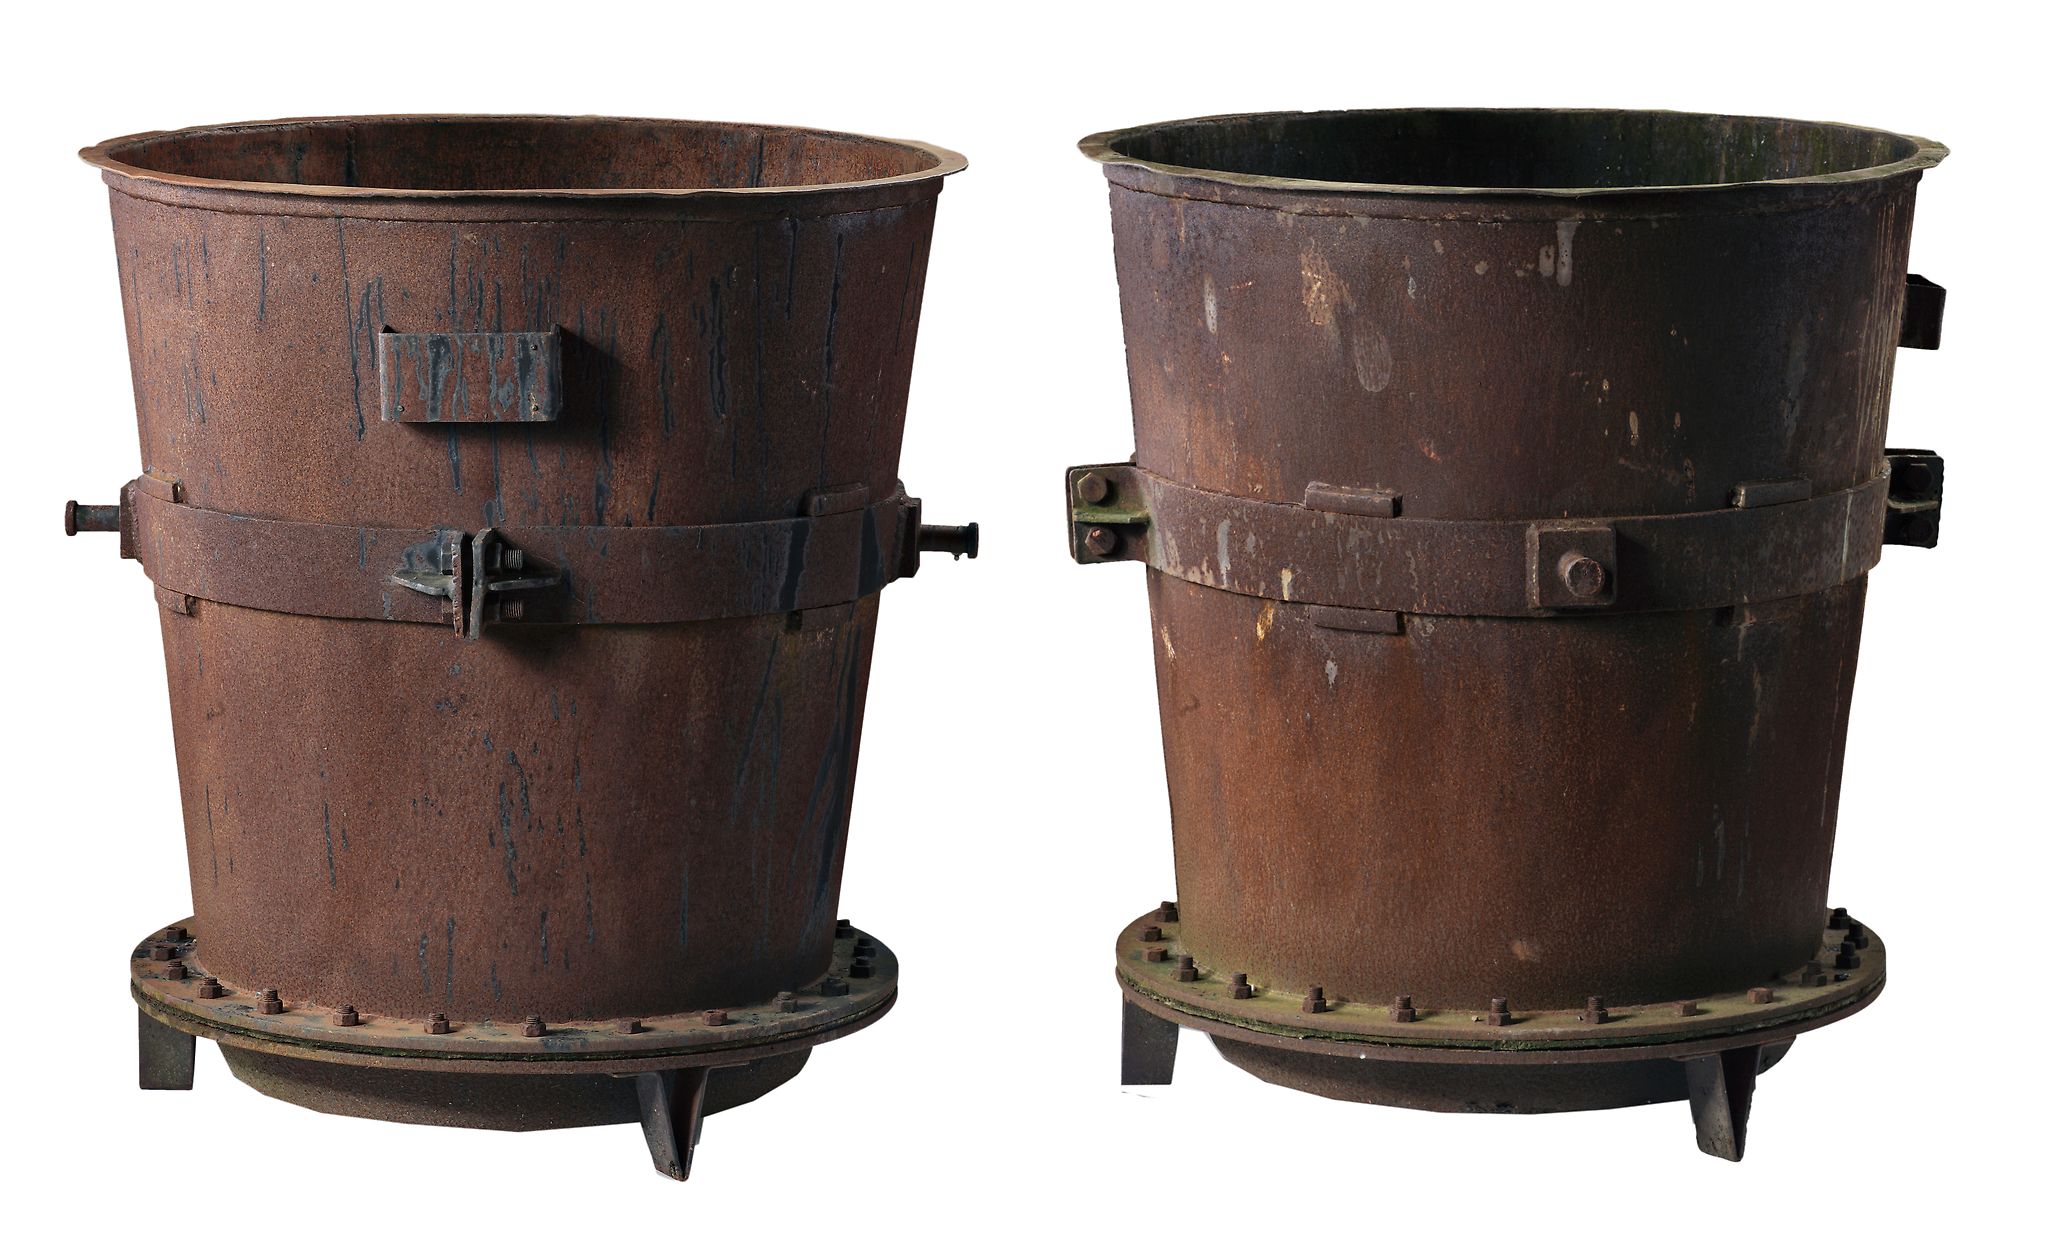 A pair of large wrought and sheet iron industrial vats  A pair of large wrought and sheet iron